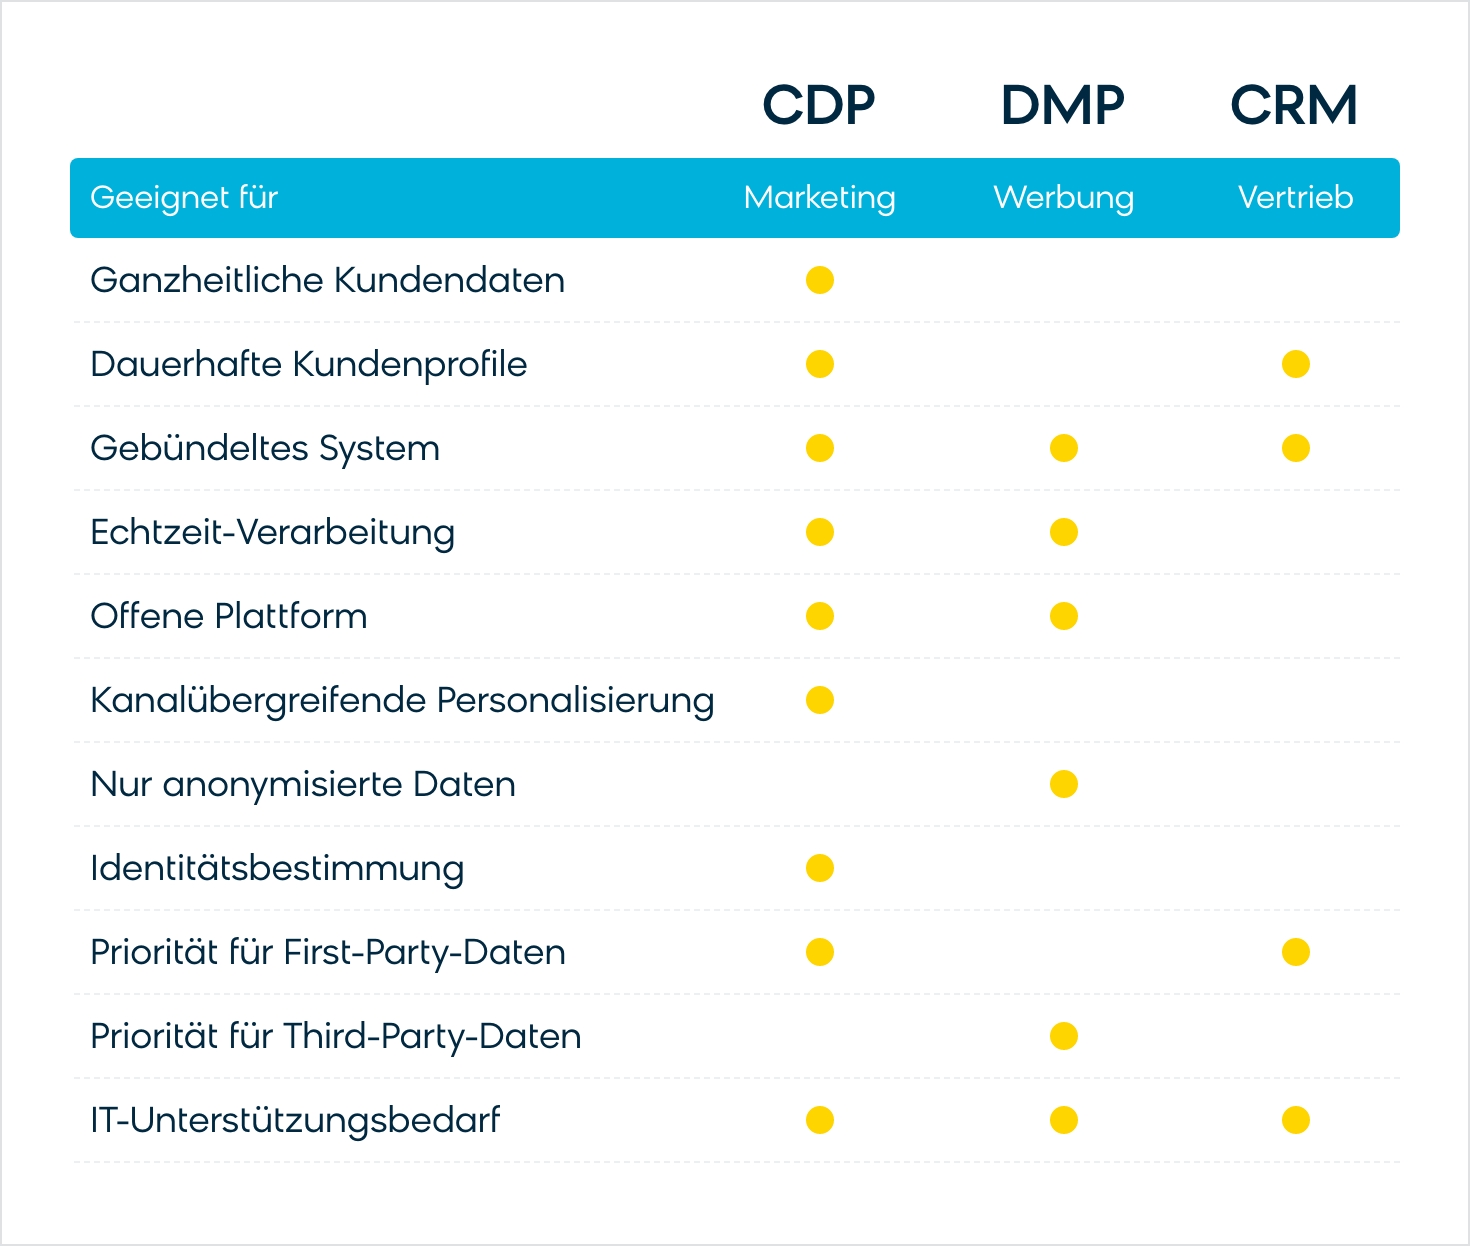 A comparison table showing the similarities and differences between a CDP vs a DMP vs a CRM